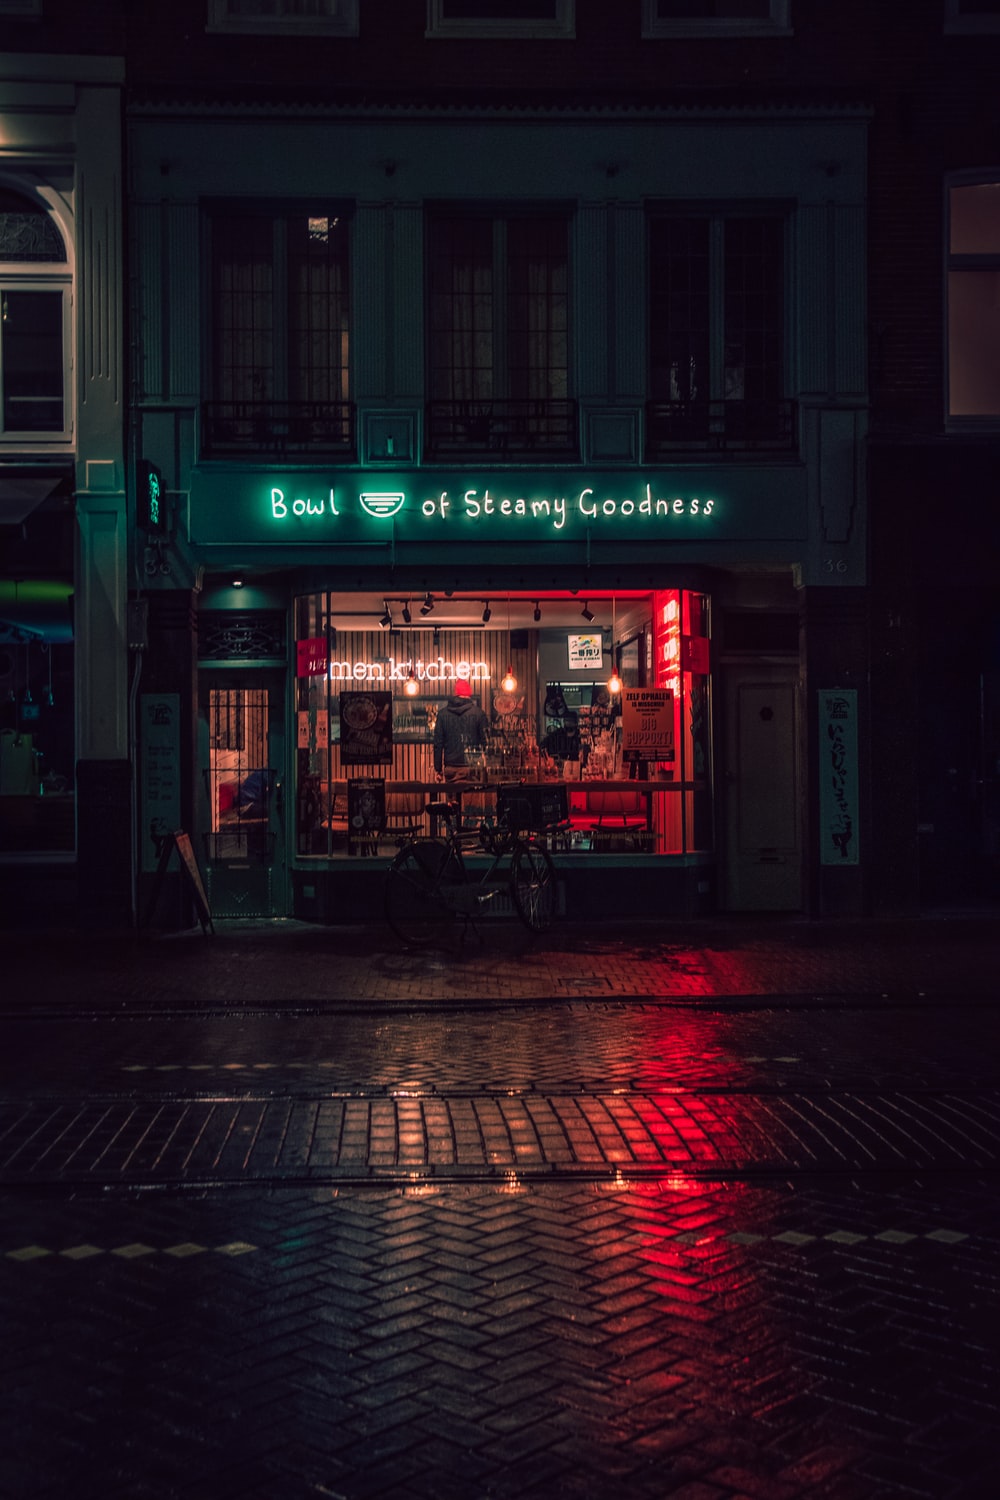 Night Cafe Picture. Download Free Image